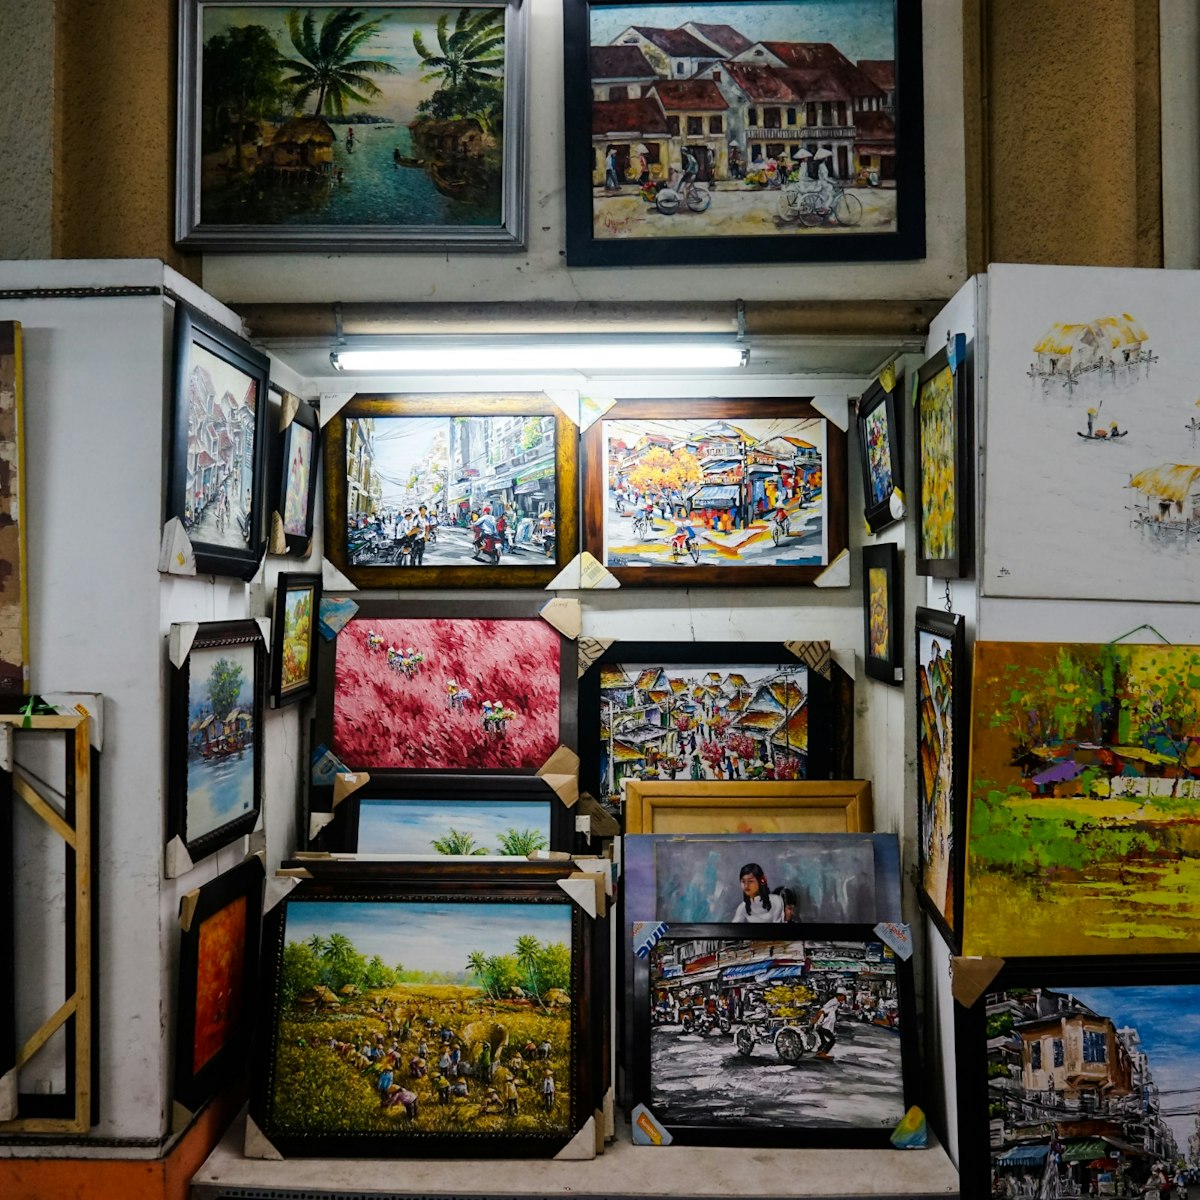 Paintings for sale in the Art Arcade